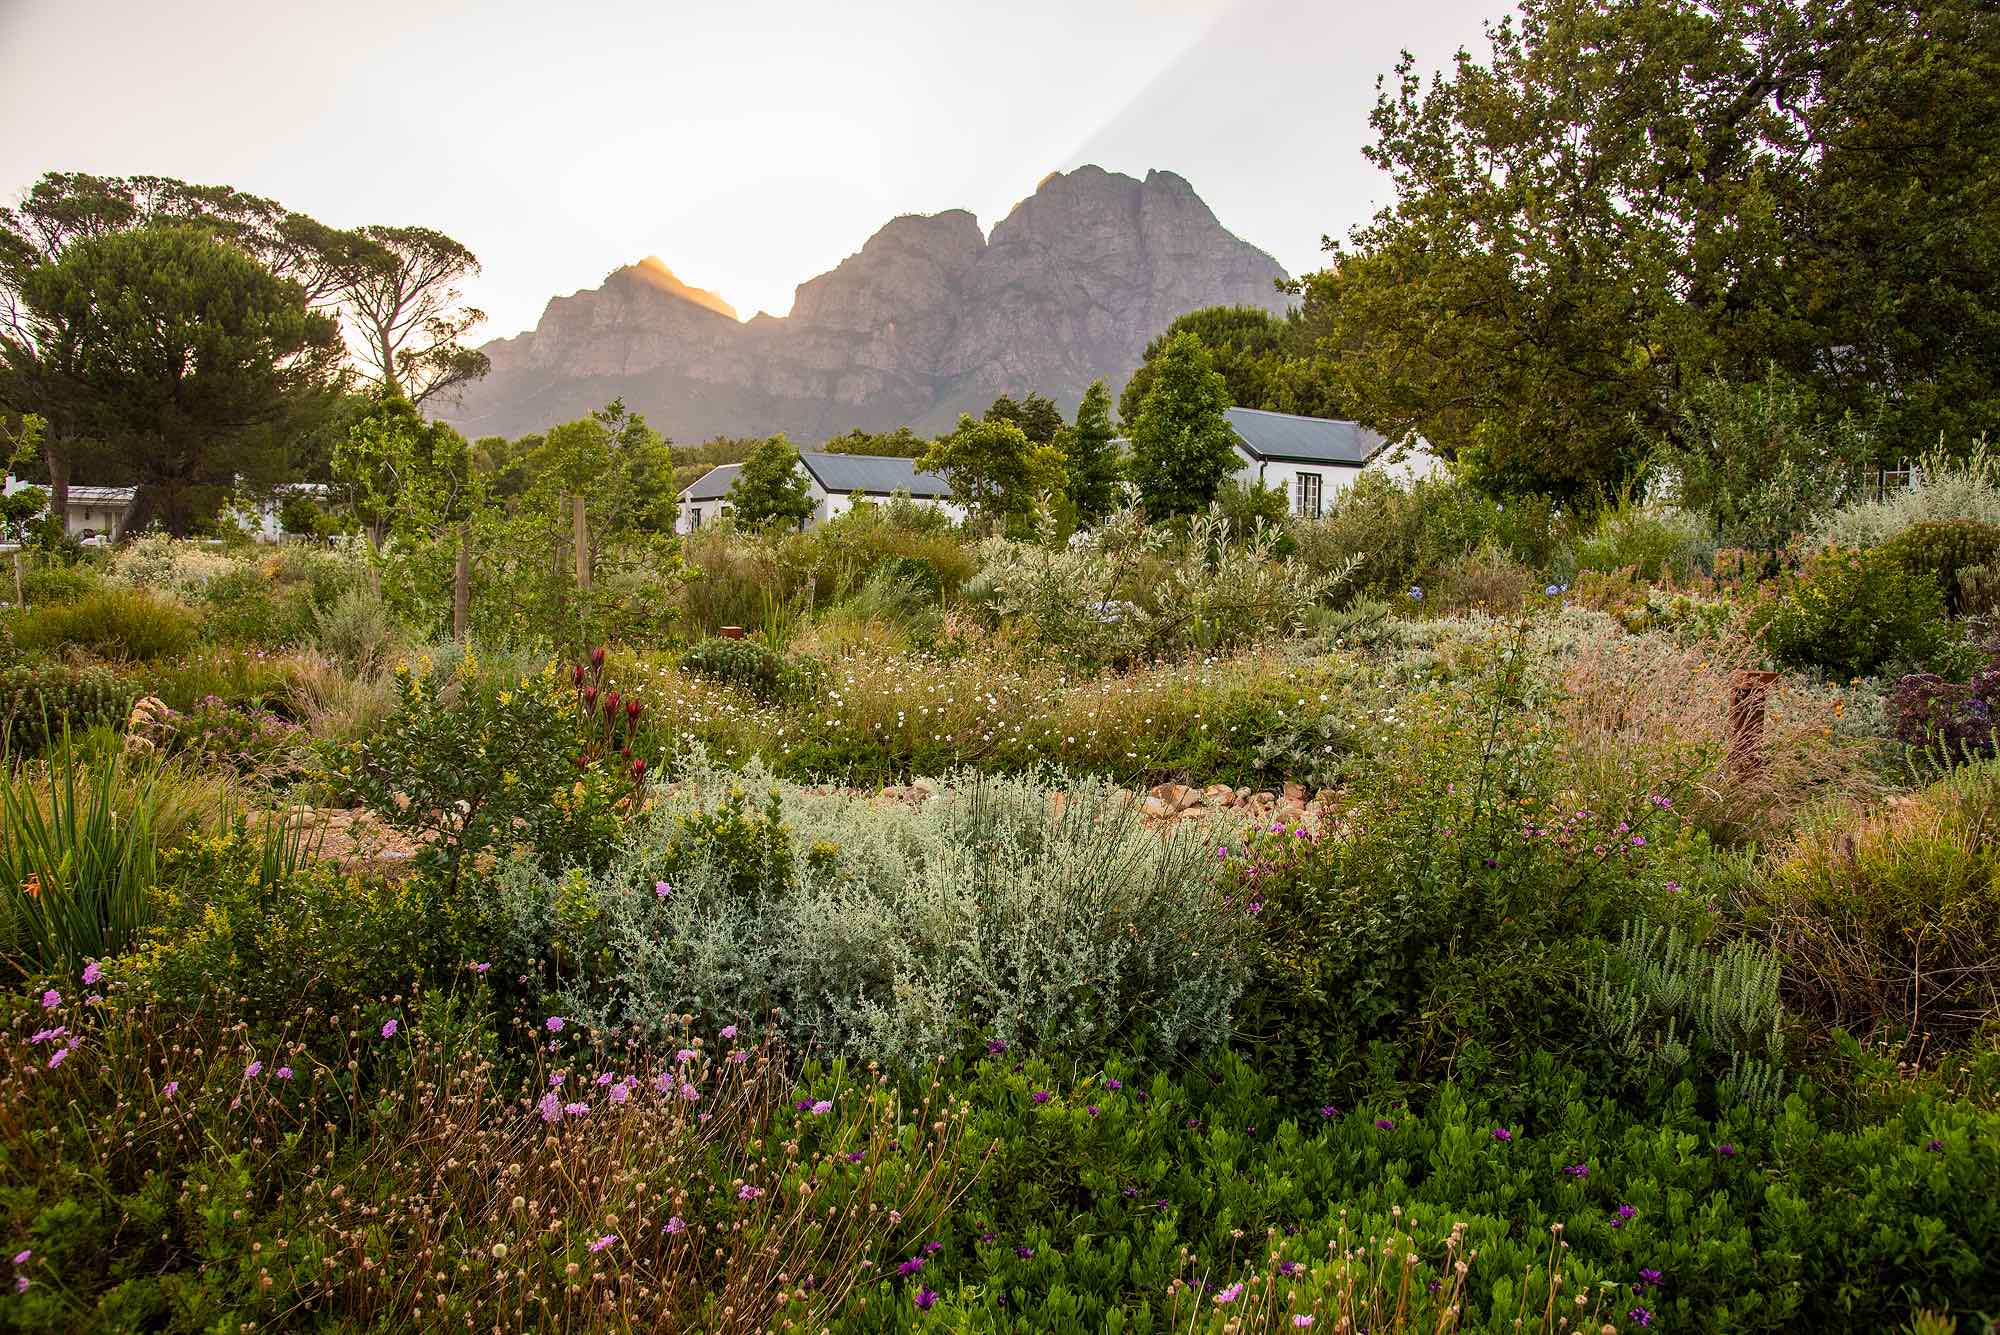 Boschendal offers a wide range of accommodation options - from boutique hotel to self-catering. Photo by Boschendal